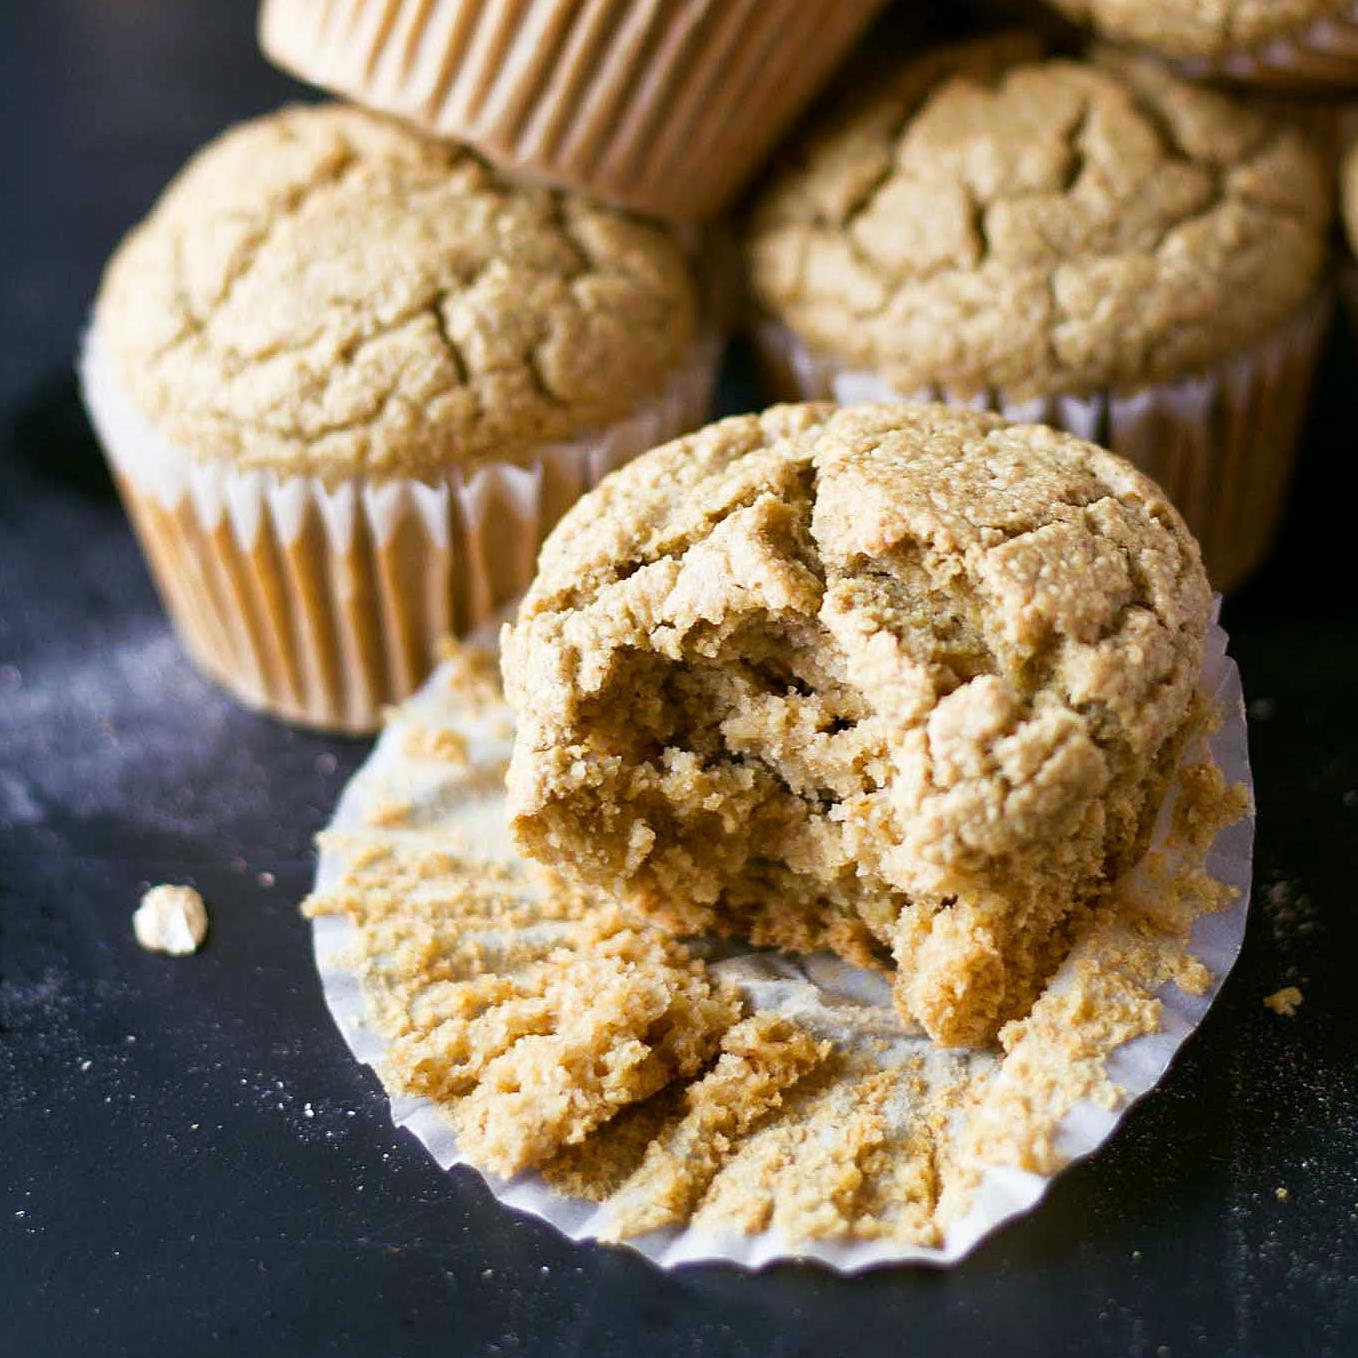  Get your baking essentials ready and let's get started on these muffins!